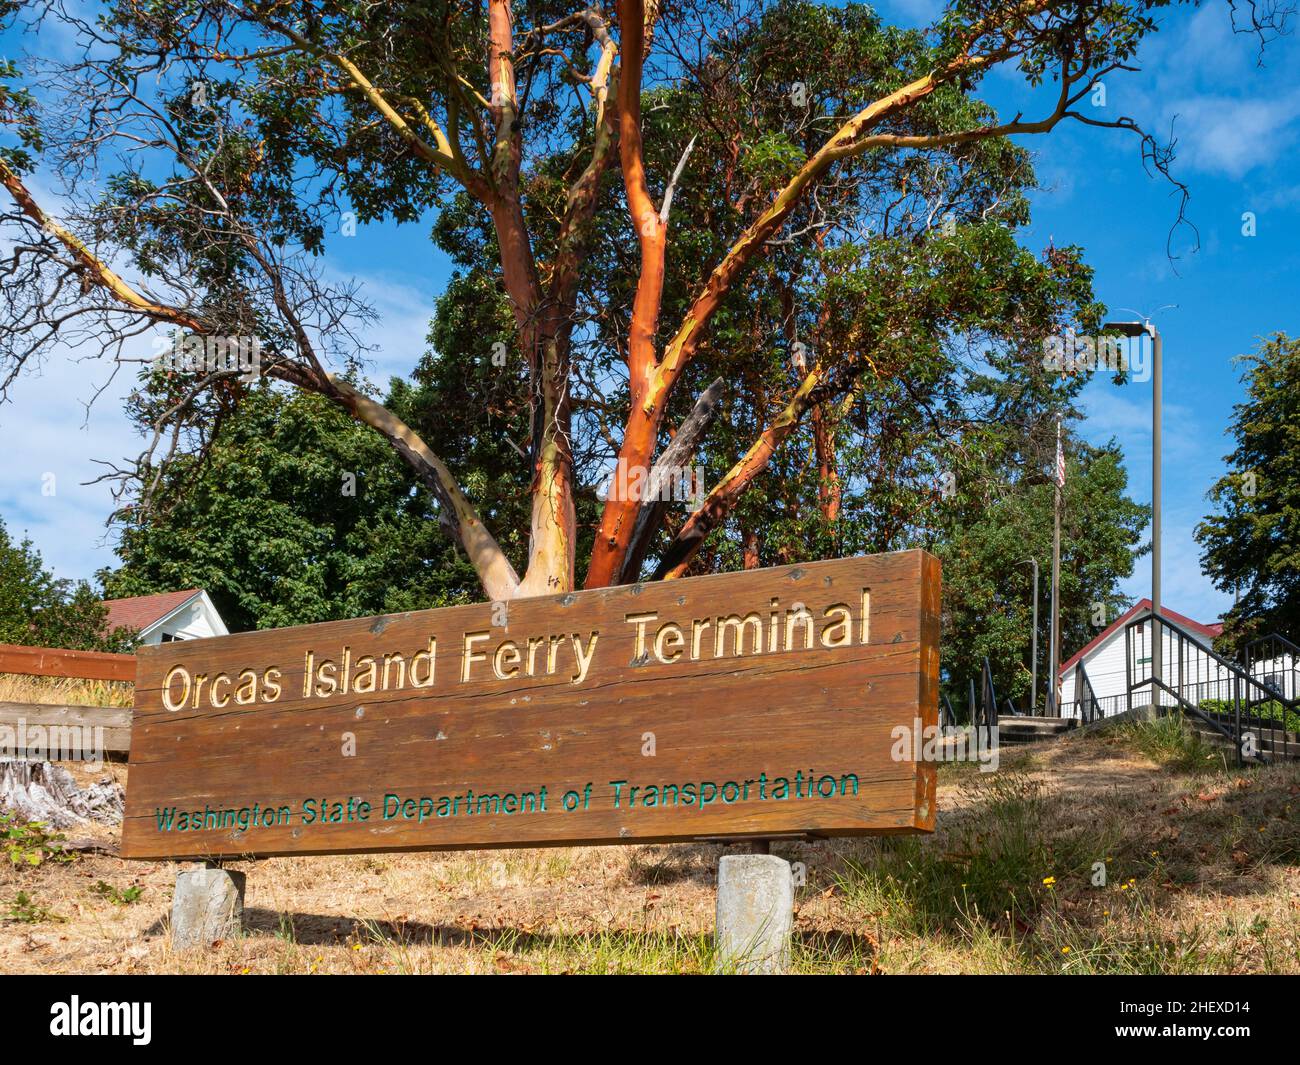 WA21100-00...WASHINGTON - Pacific madrone standing tall above the sign for the Orcas Island Ferry Terminal at Orcas Village. Stock Photo